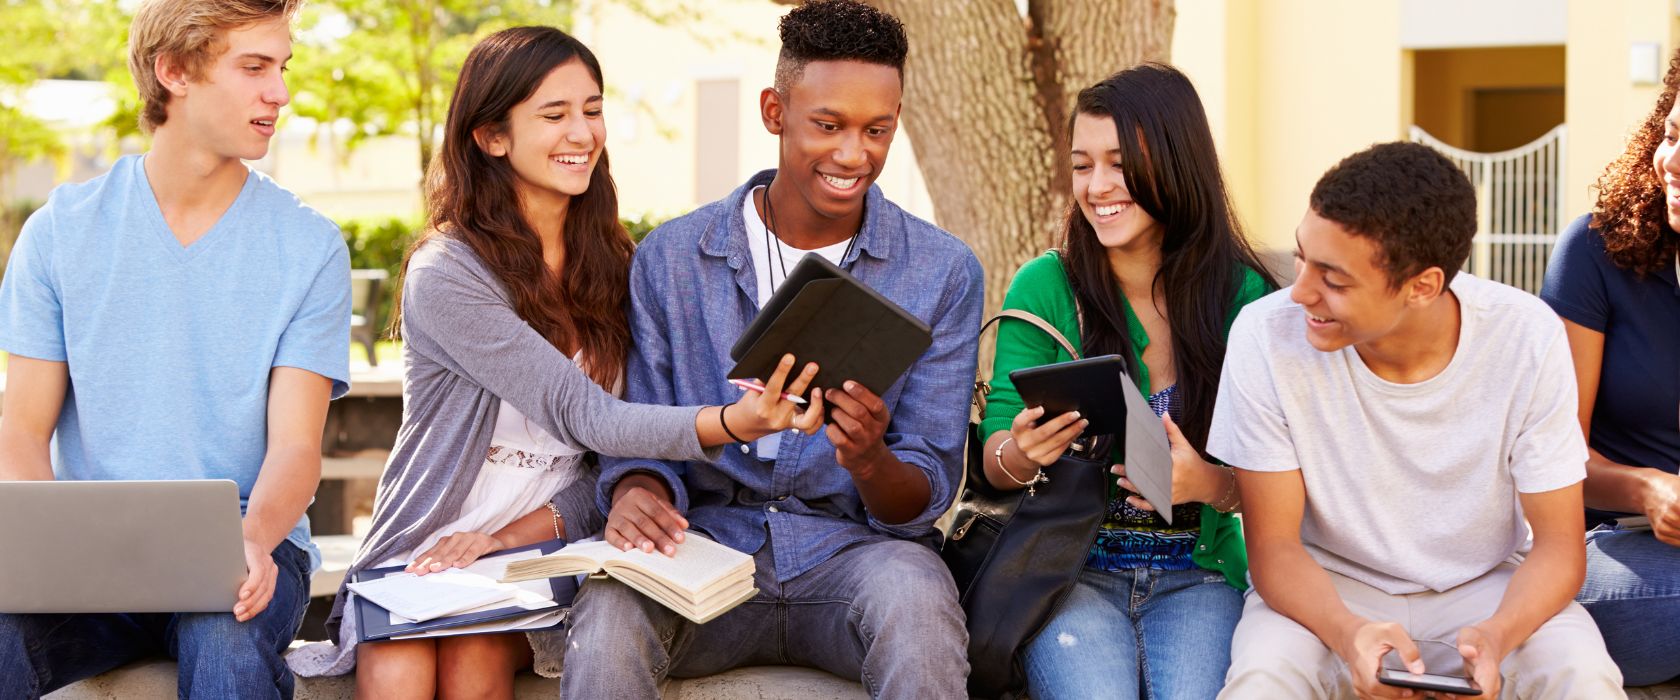 Group of high school students sitting outside with homework